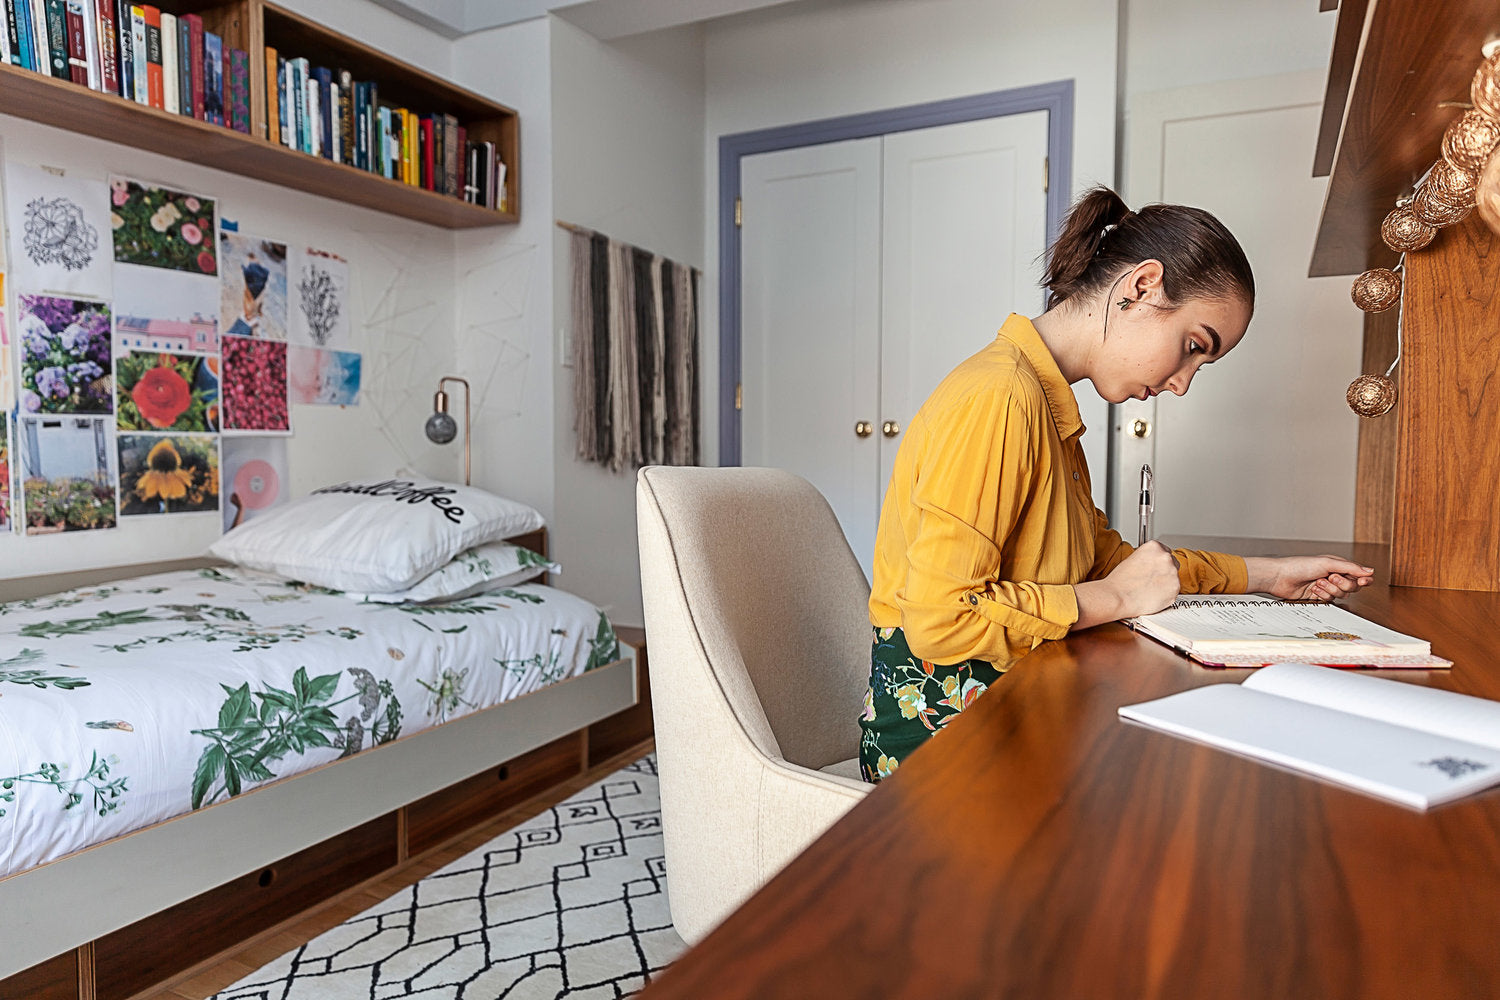 Young woman in yellow shirt studying at a desk in a cozy bedroom with bookshelves and art on walls.